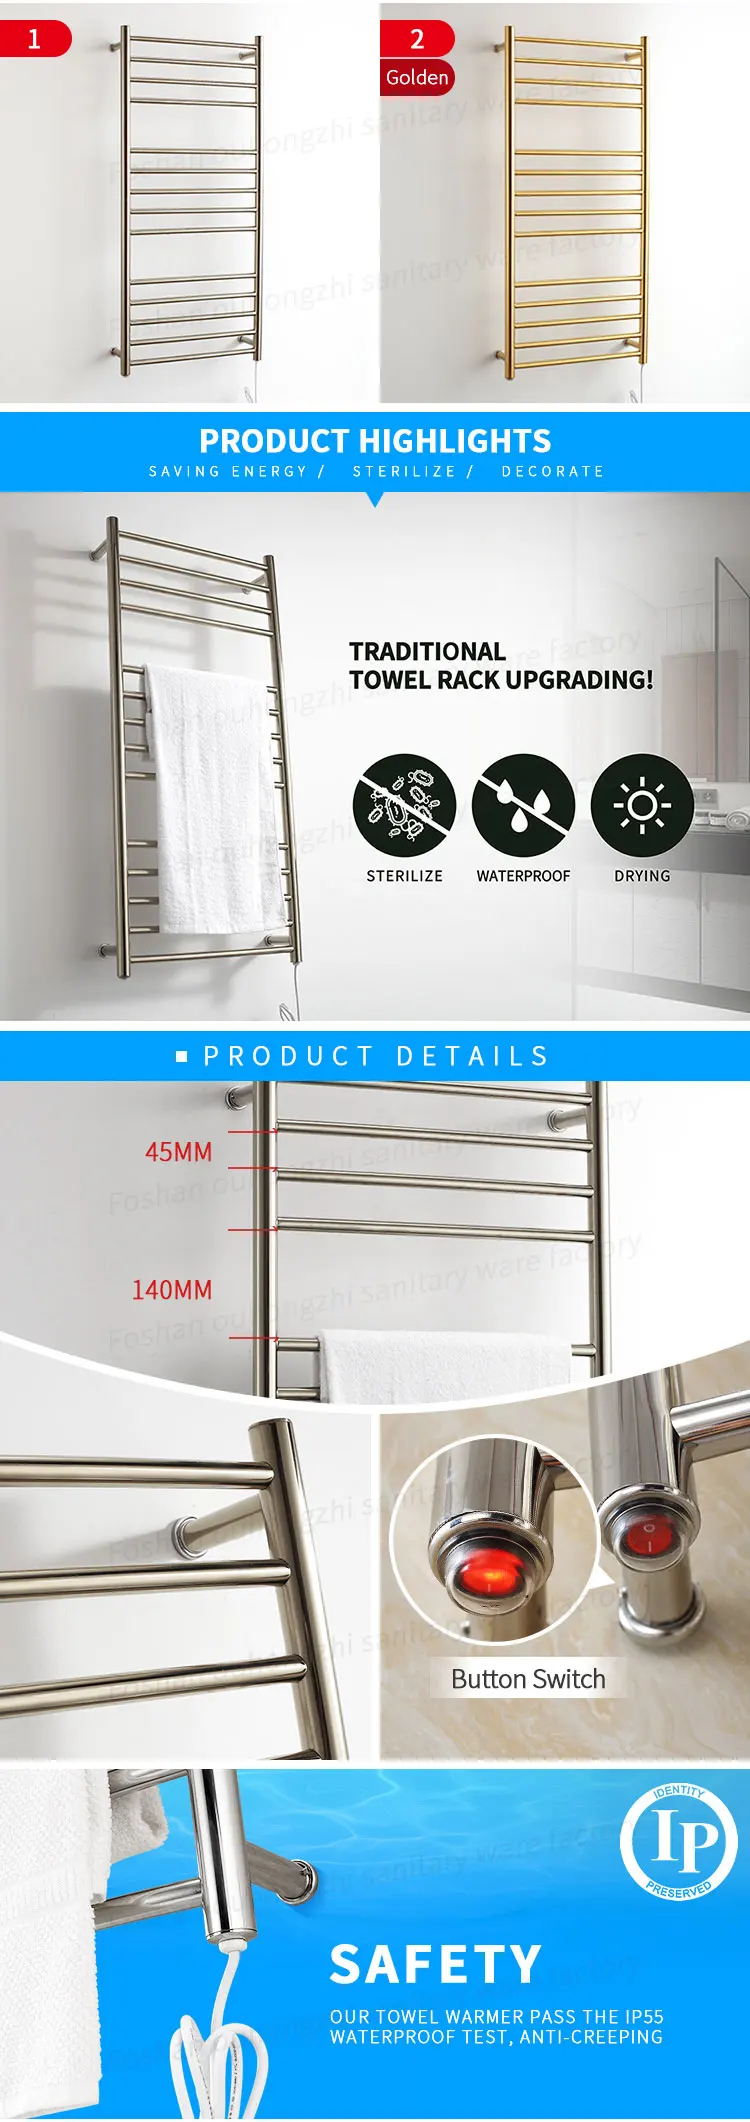 Hot selling Stainless Steel Wall Mounted Heated Towel Warmer